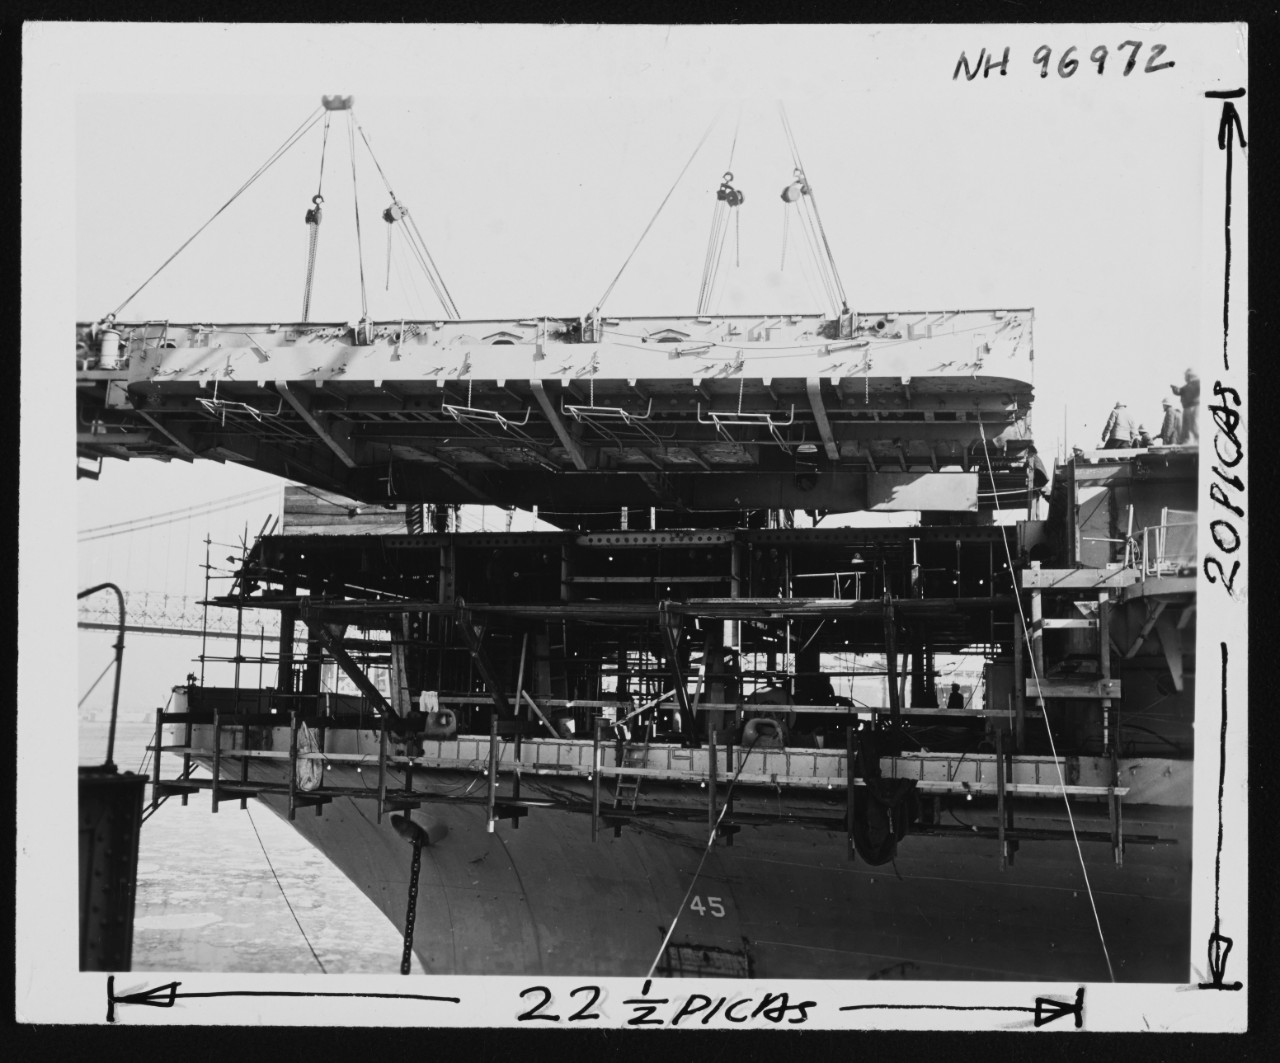 Photo #: NH 96972  USS Valley Forge (CVS-45)